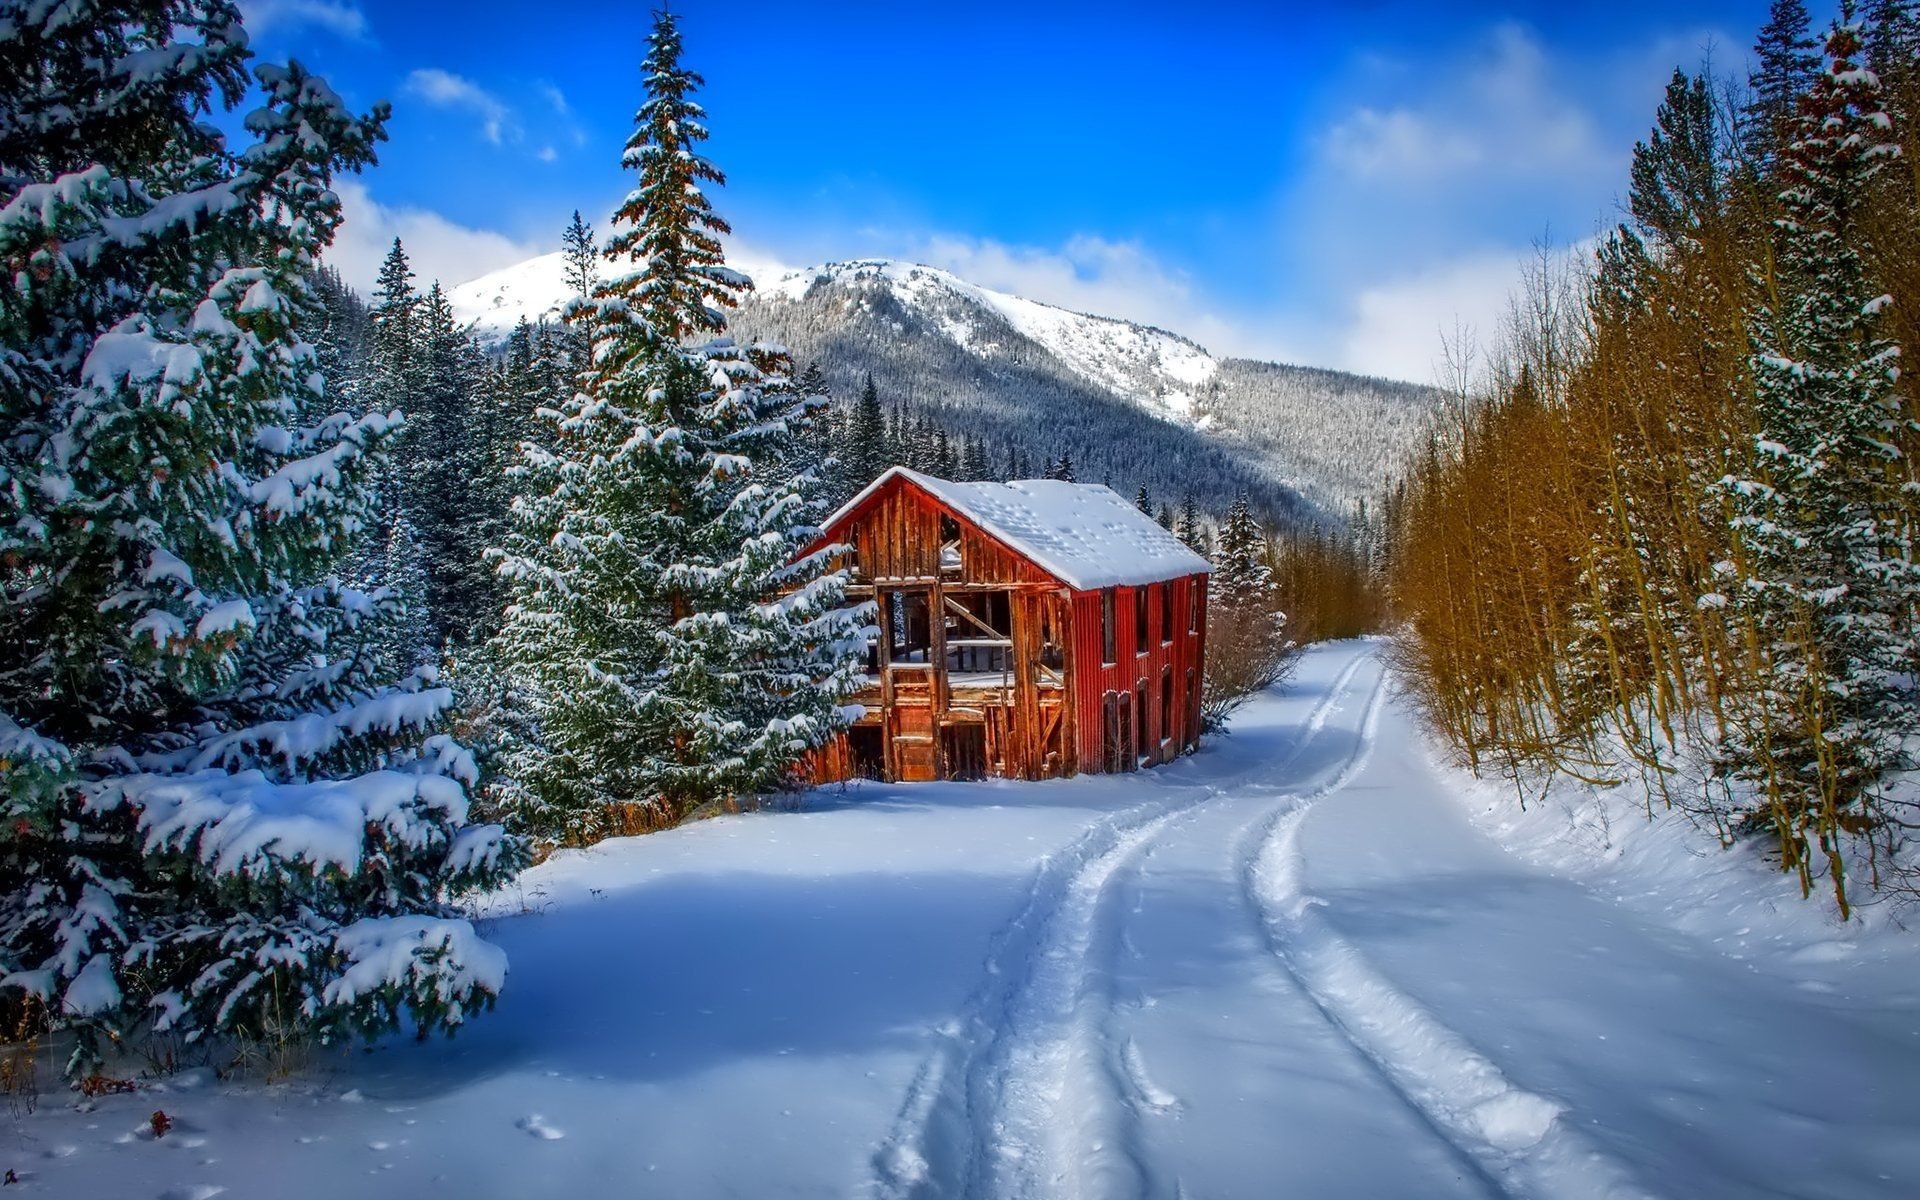 Christmas Cottage Wallpaper 64 Pictures